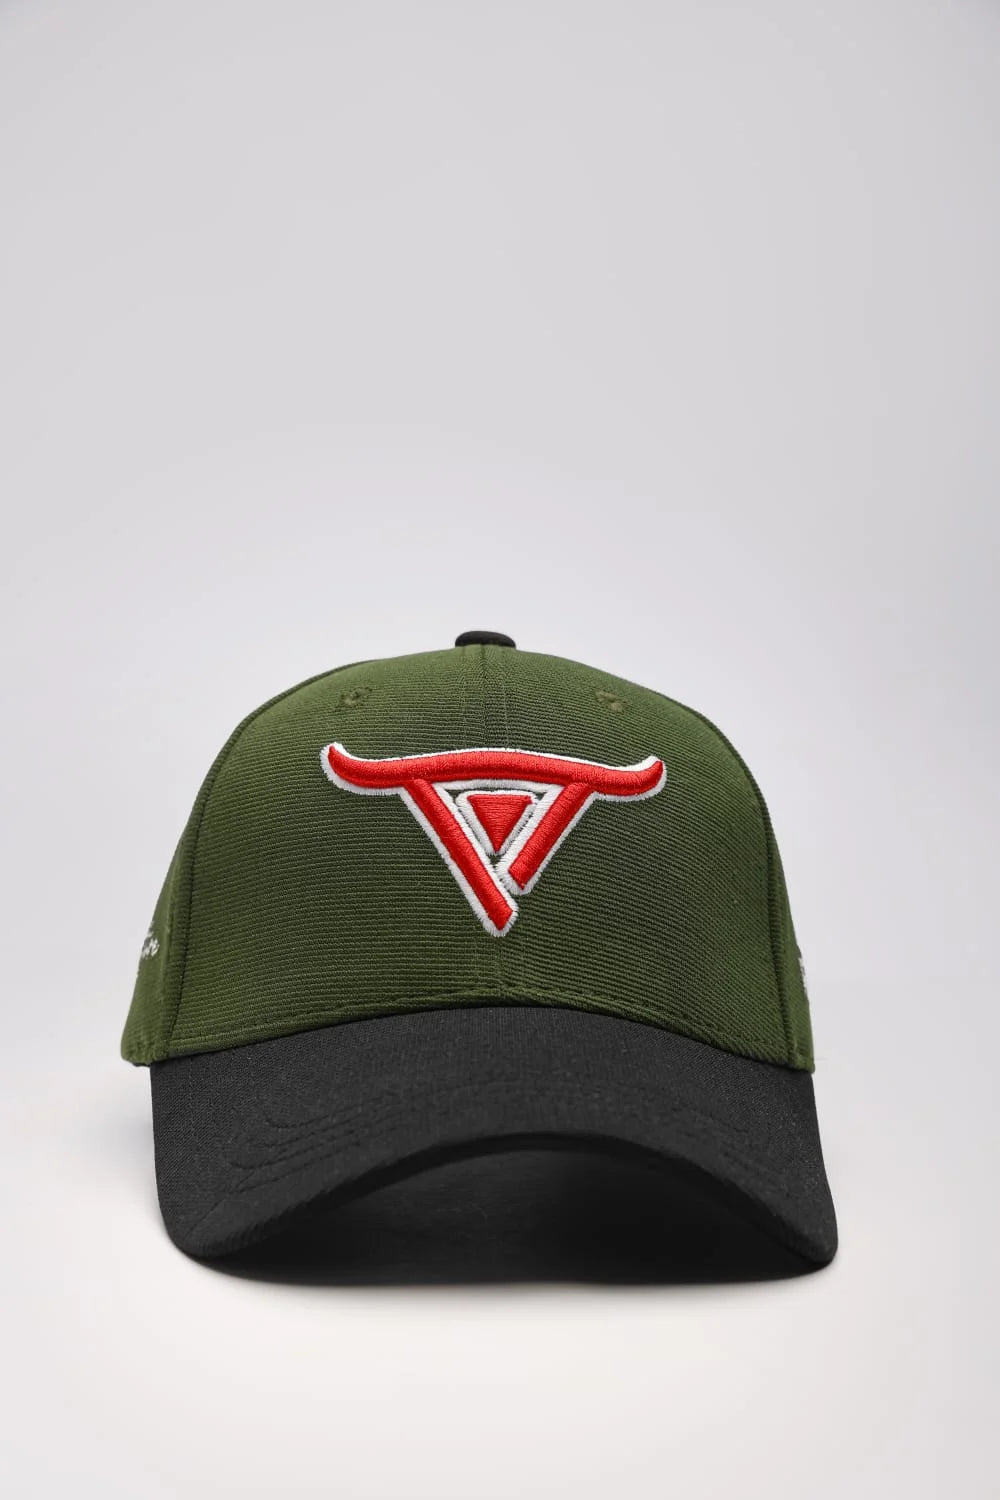 Unisex Green solid baseball cap, has a visor by One Player